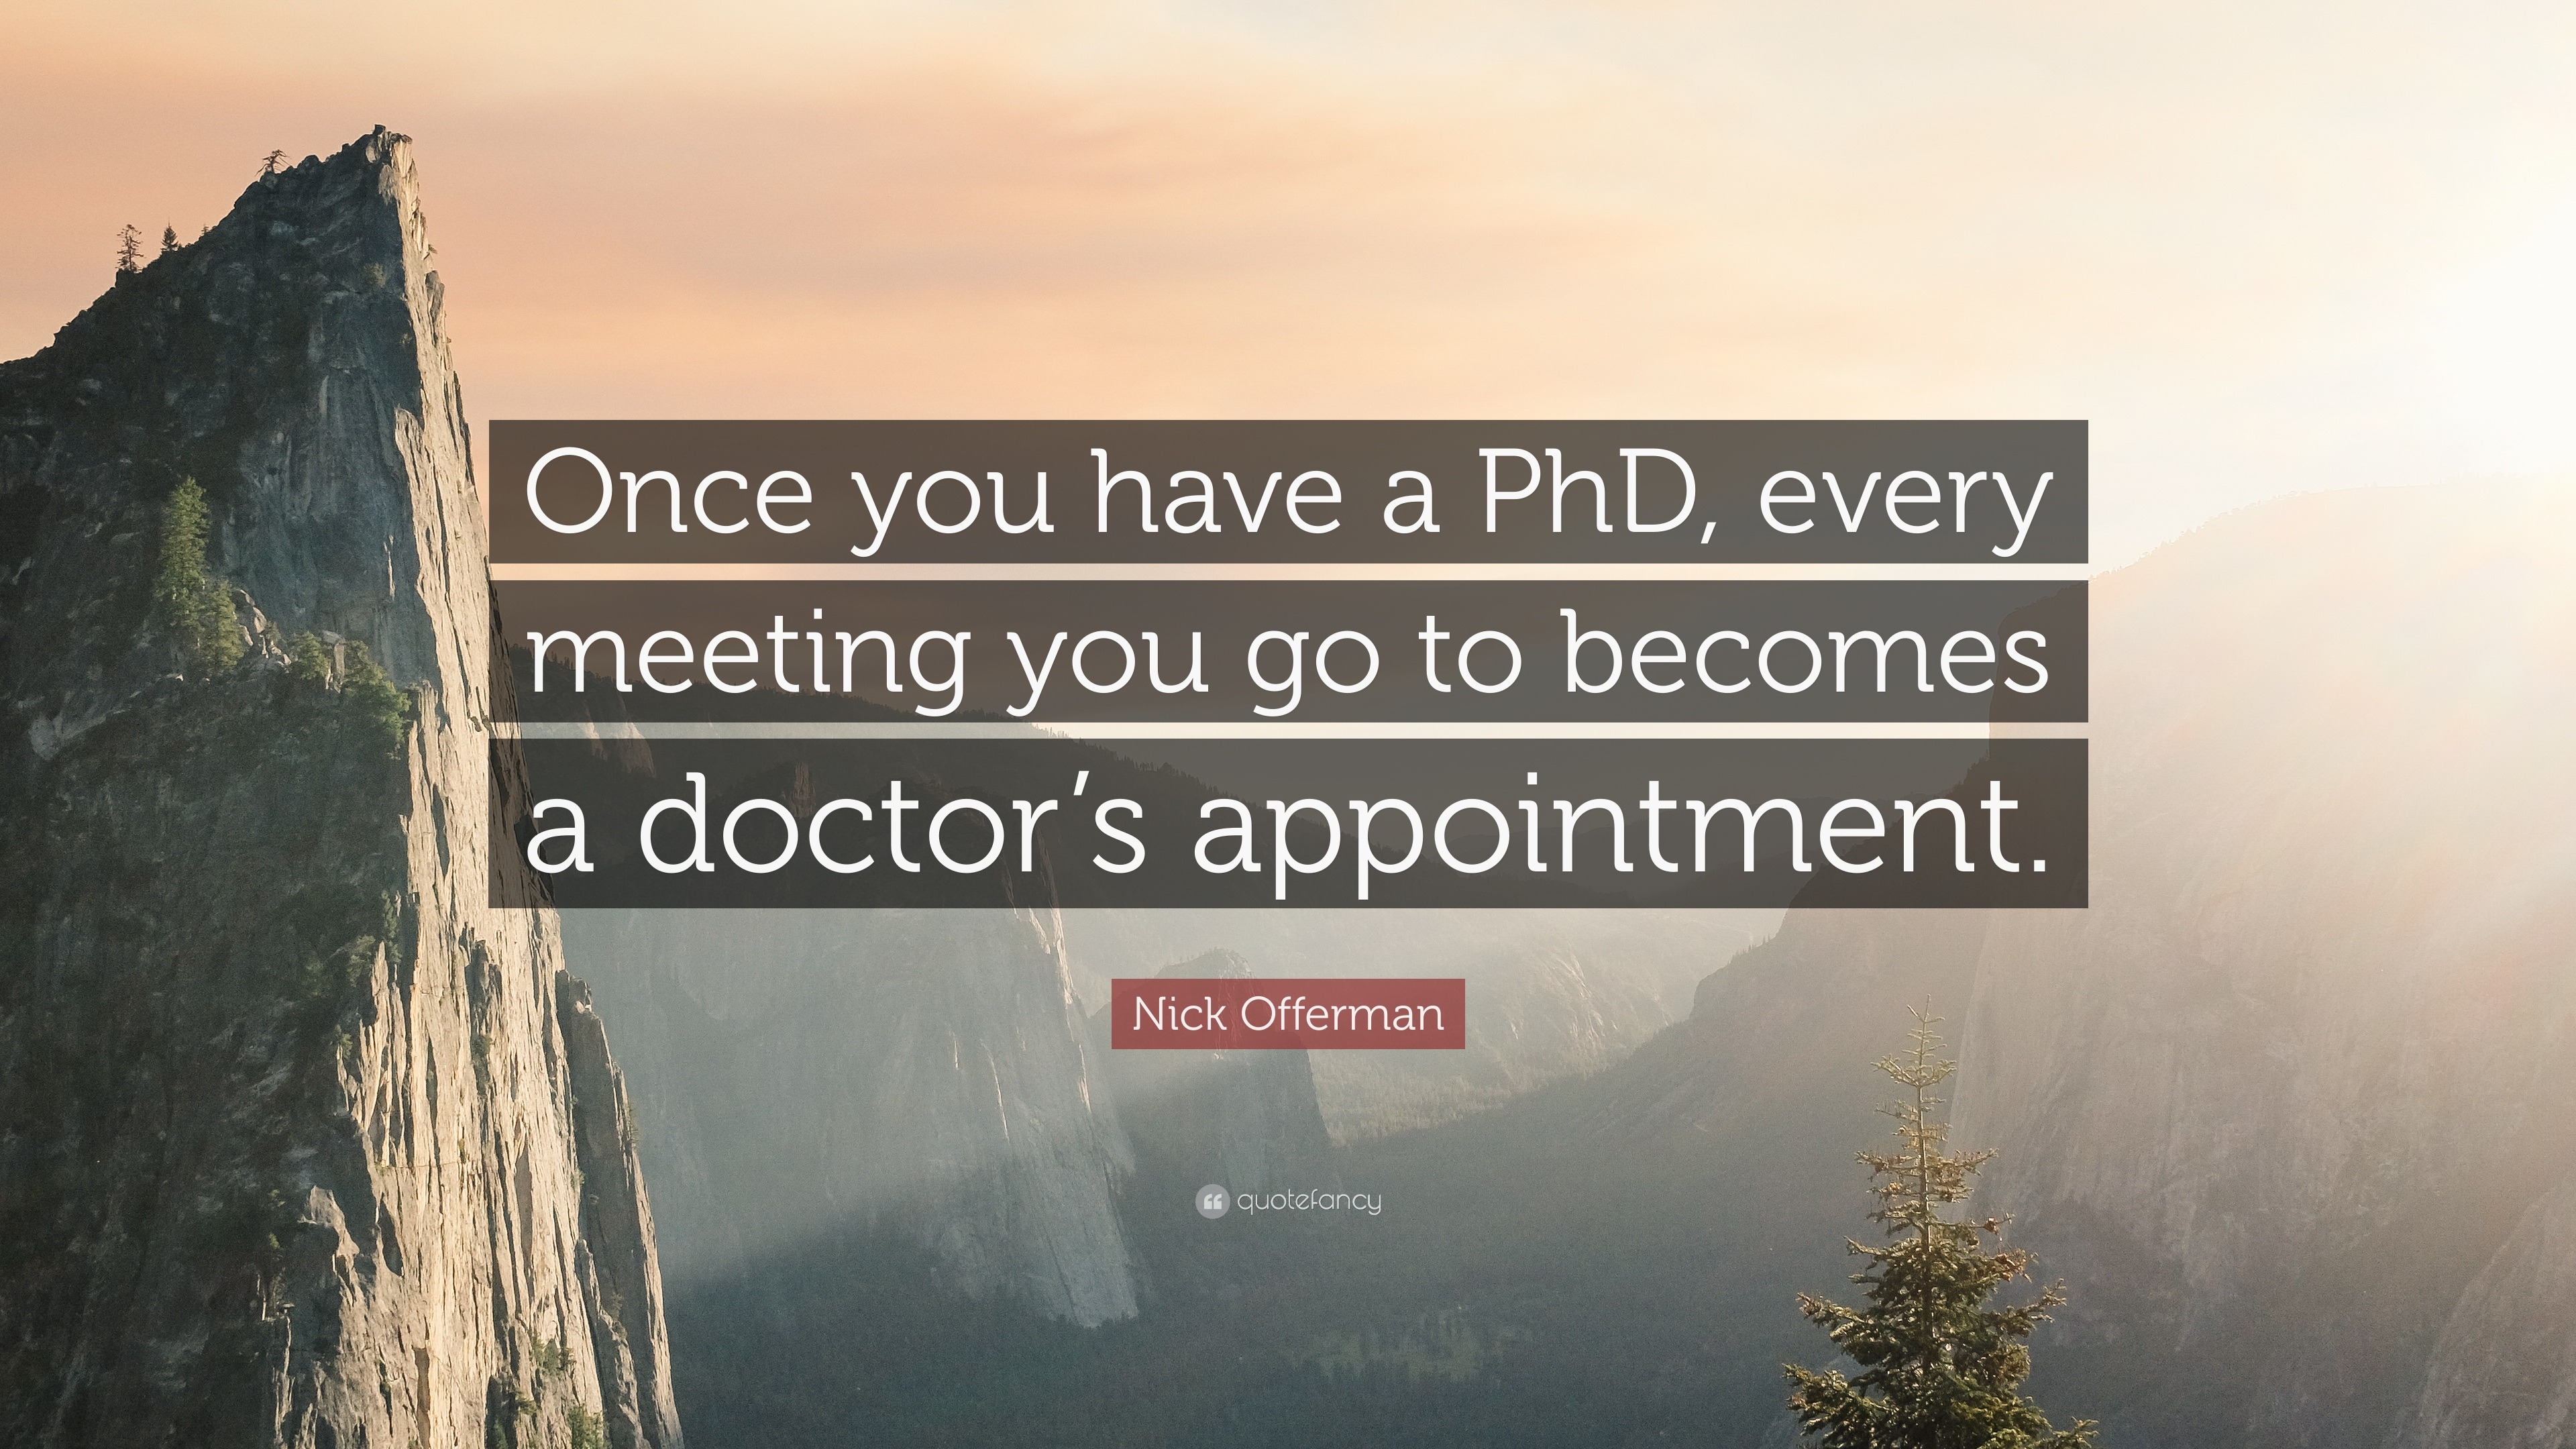 are you a doctor when you have a phd